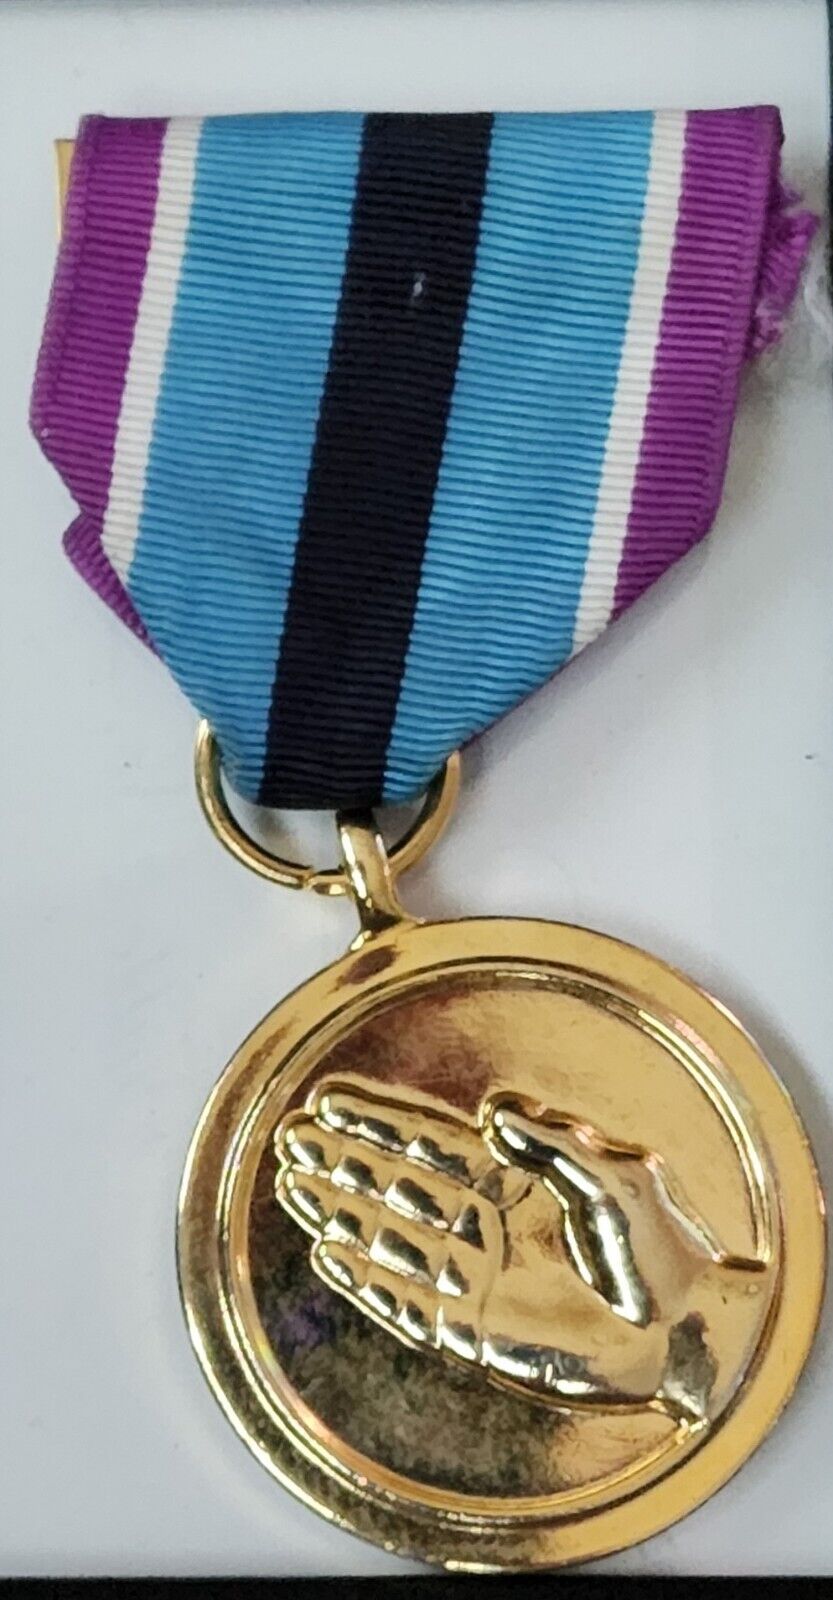 GENUINE U.S. FULL SIZE MEDAL: HUMANITARIAN SERVICE - 24K GOLD PLATED